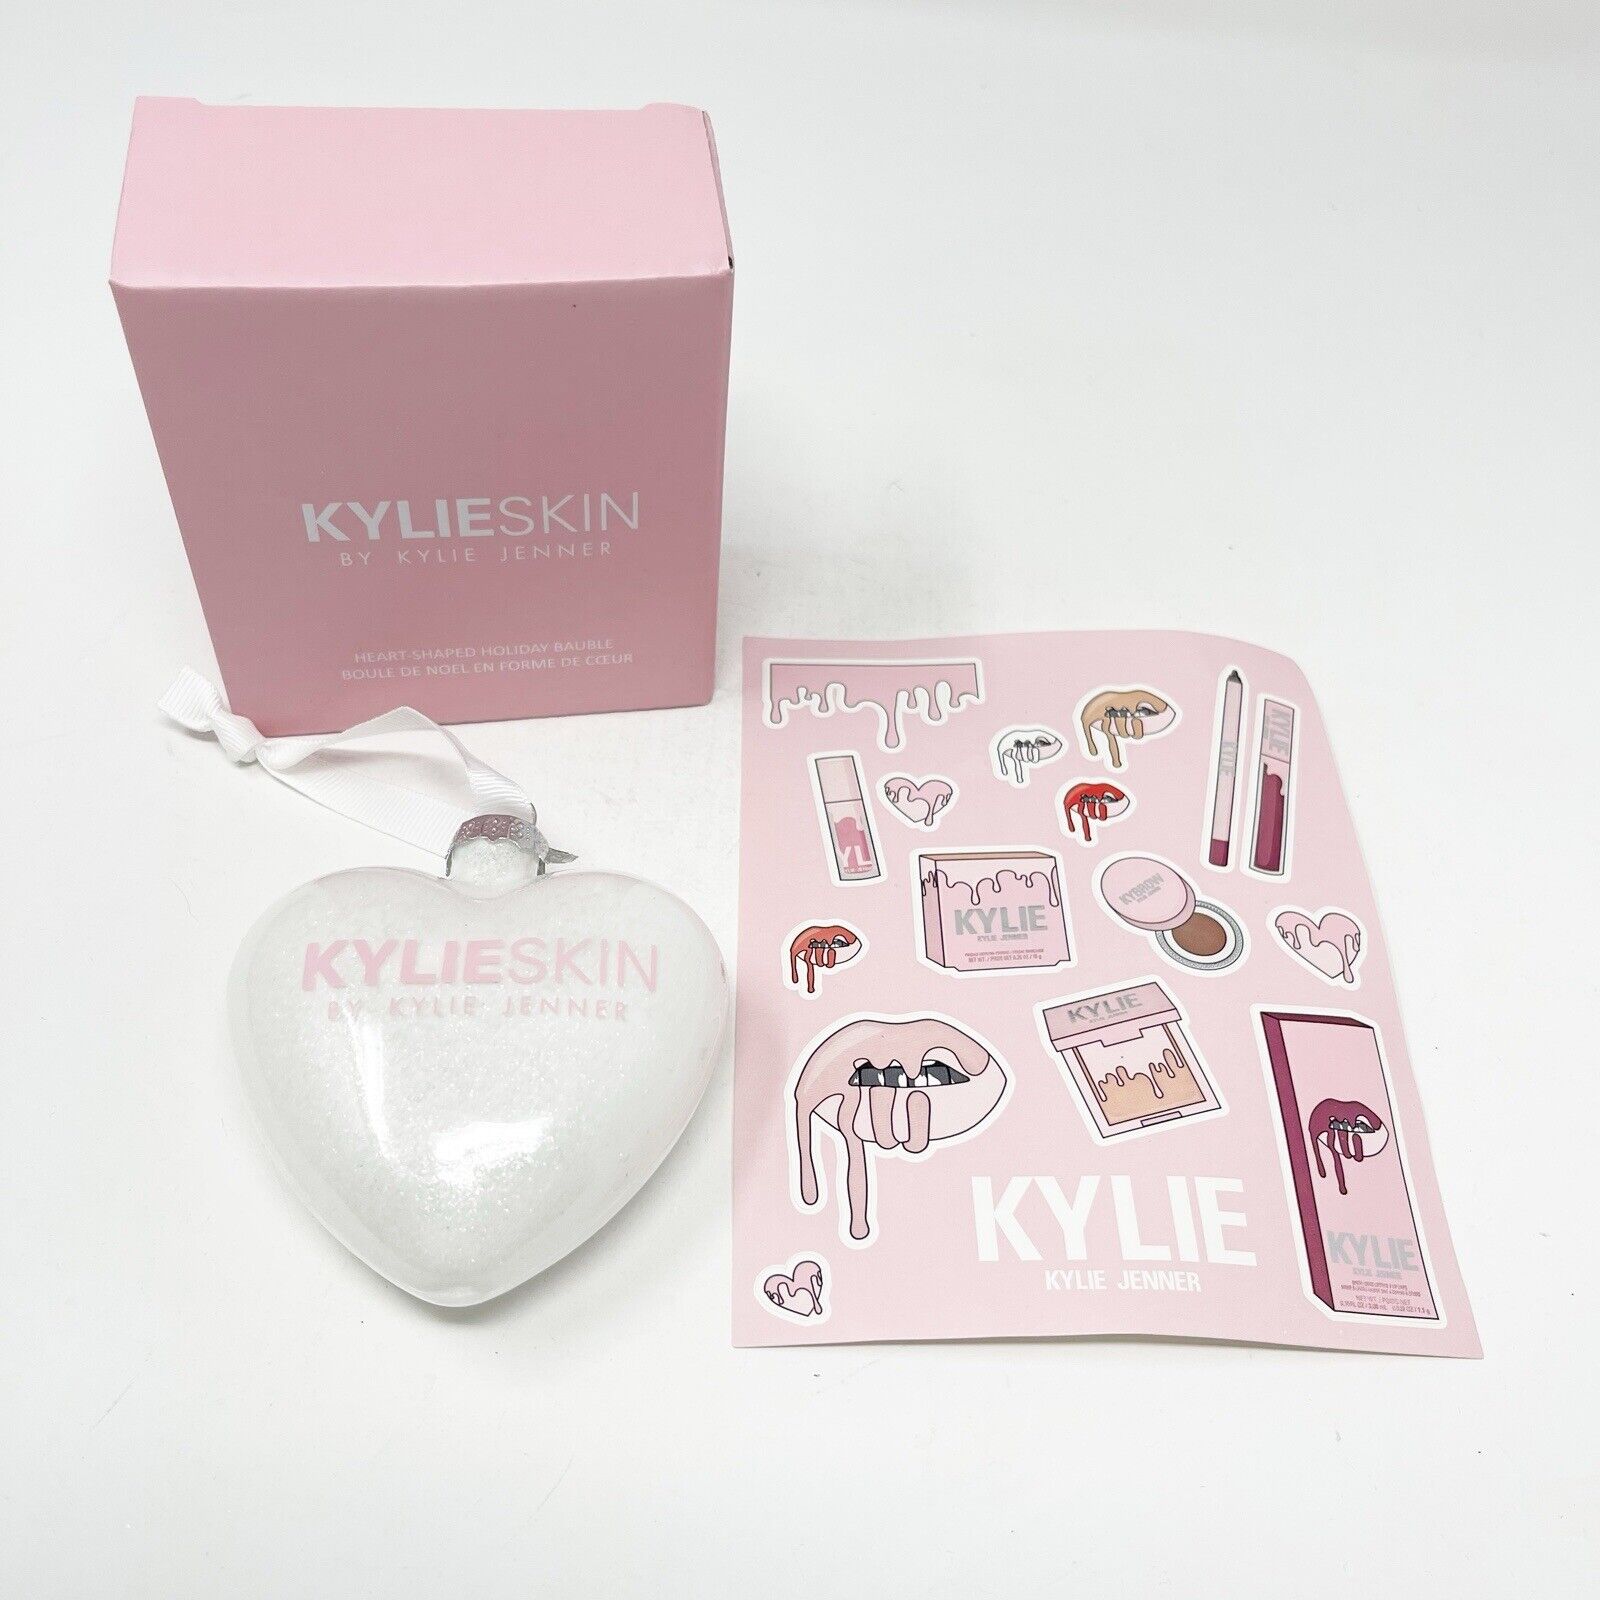 Kylie Skin Heart Shaped Holiday Bauble Ornament White Sparkle 2020 & Stickers